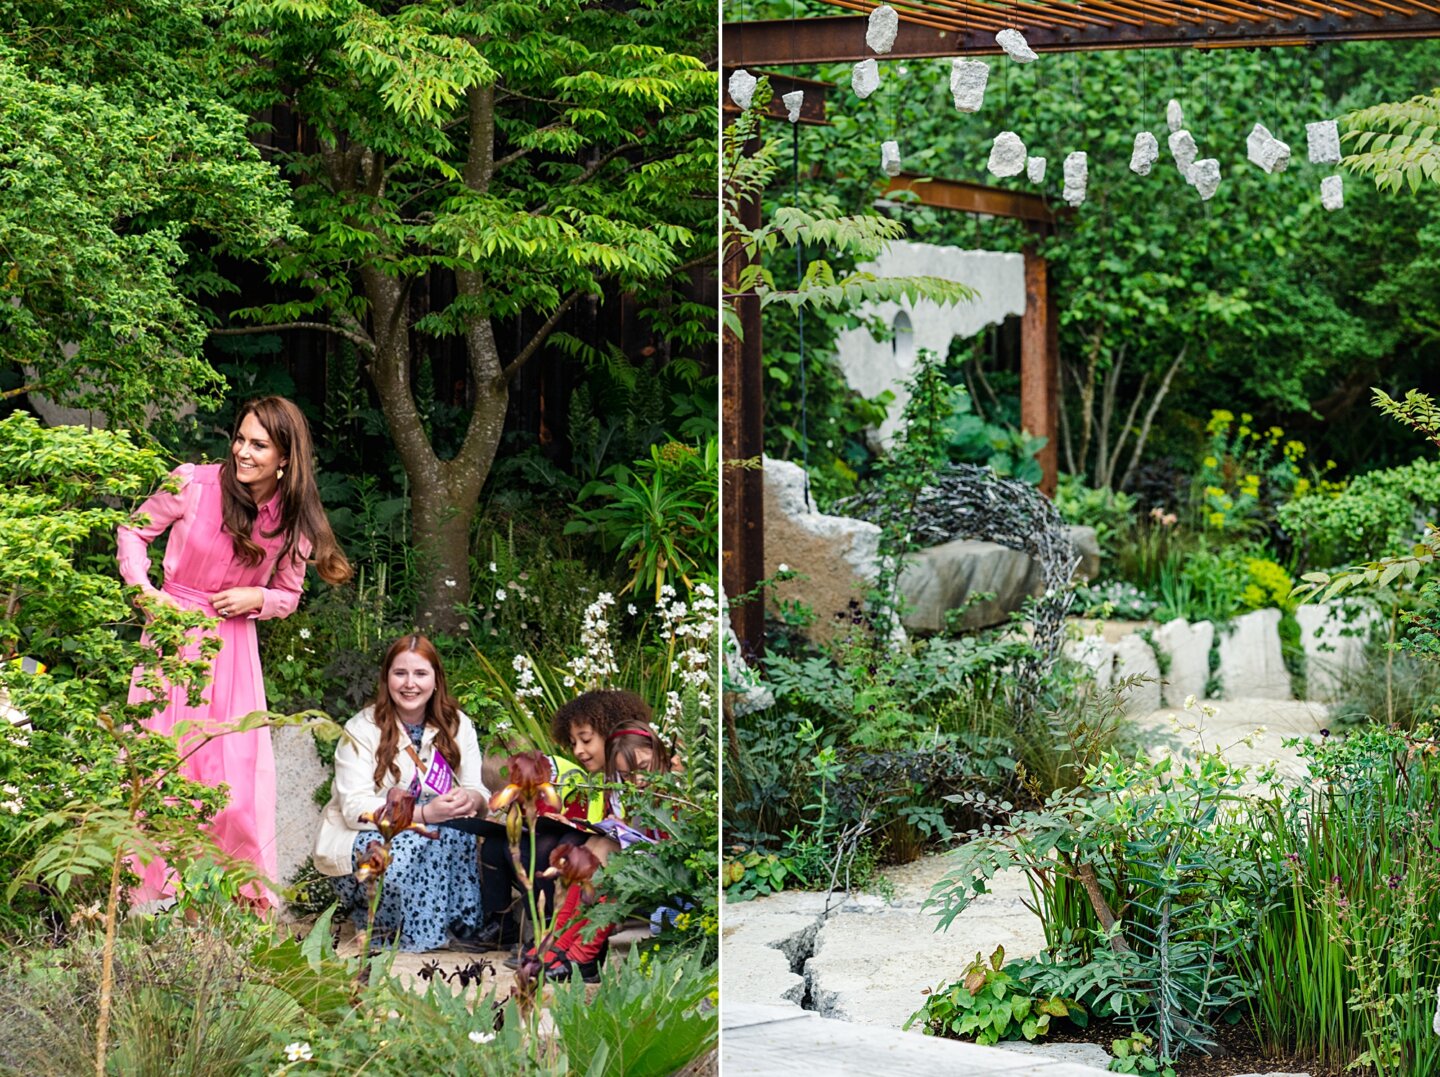 Catherine Princess of Wales visits Chelsea Flower Show Samaritans garden with local children